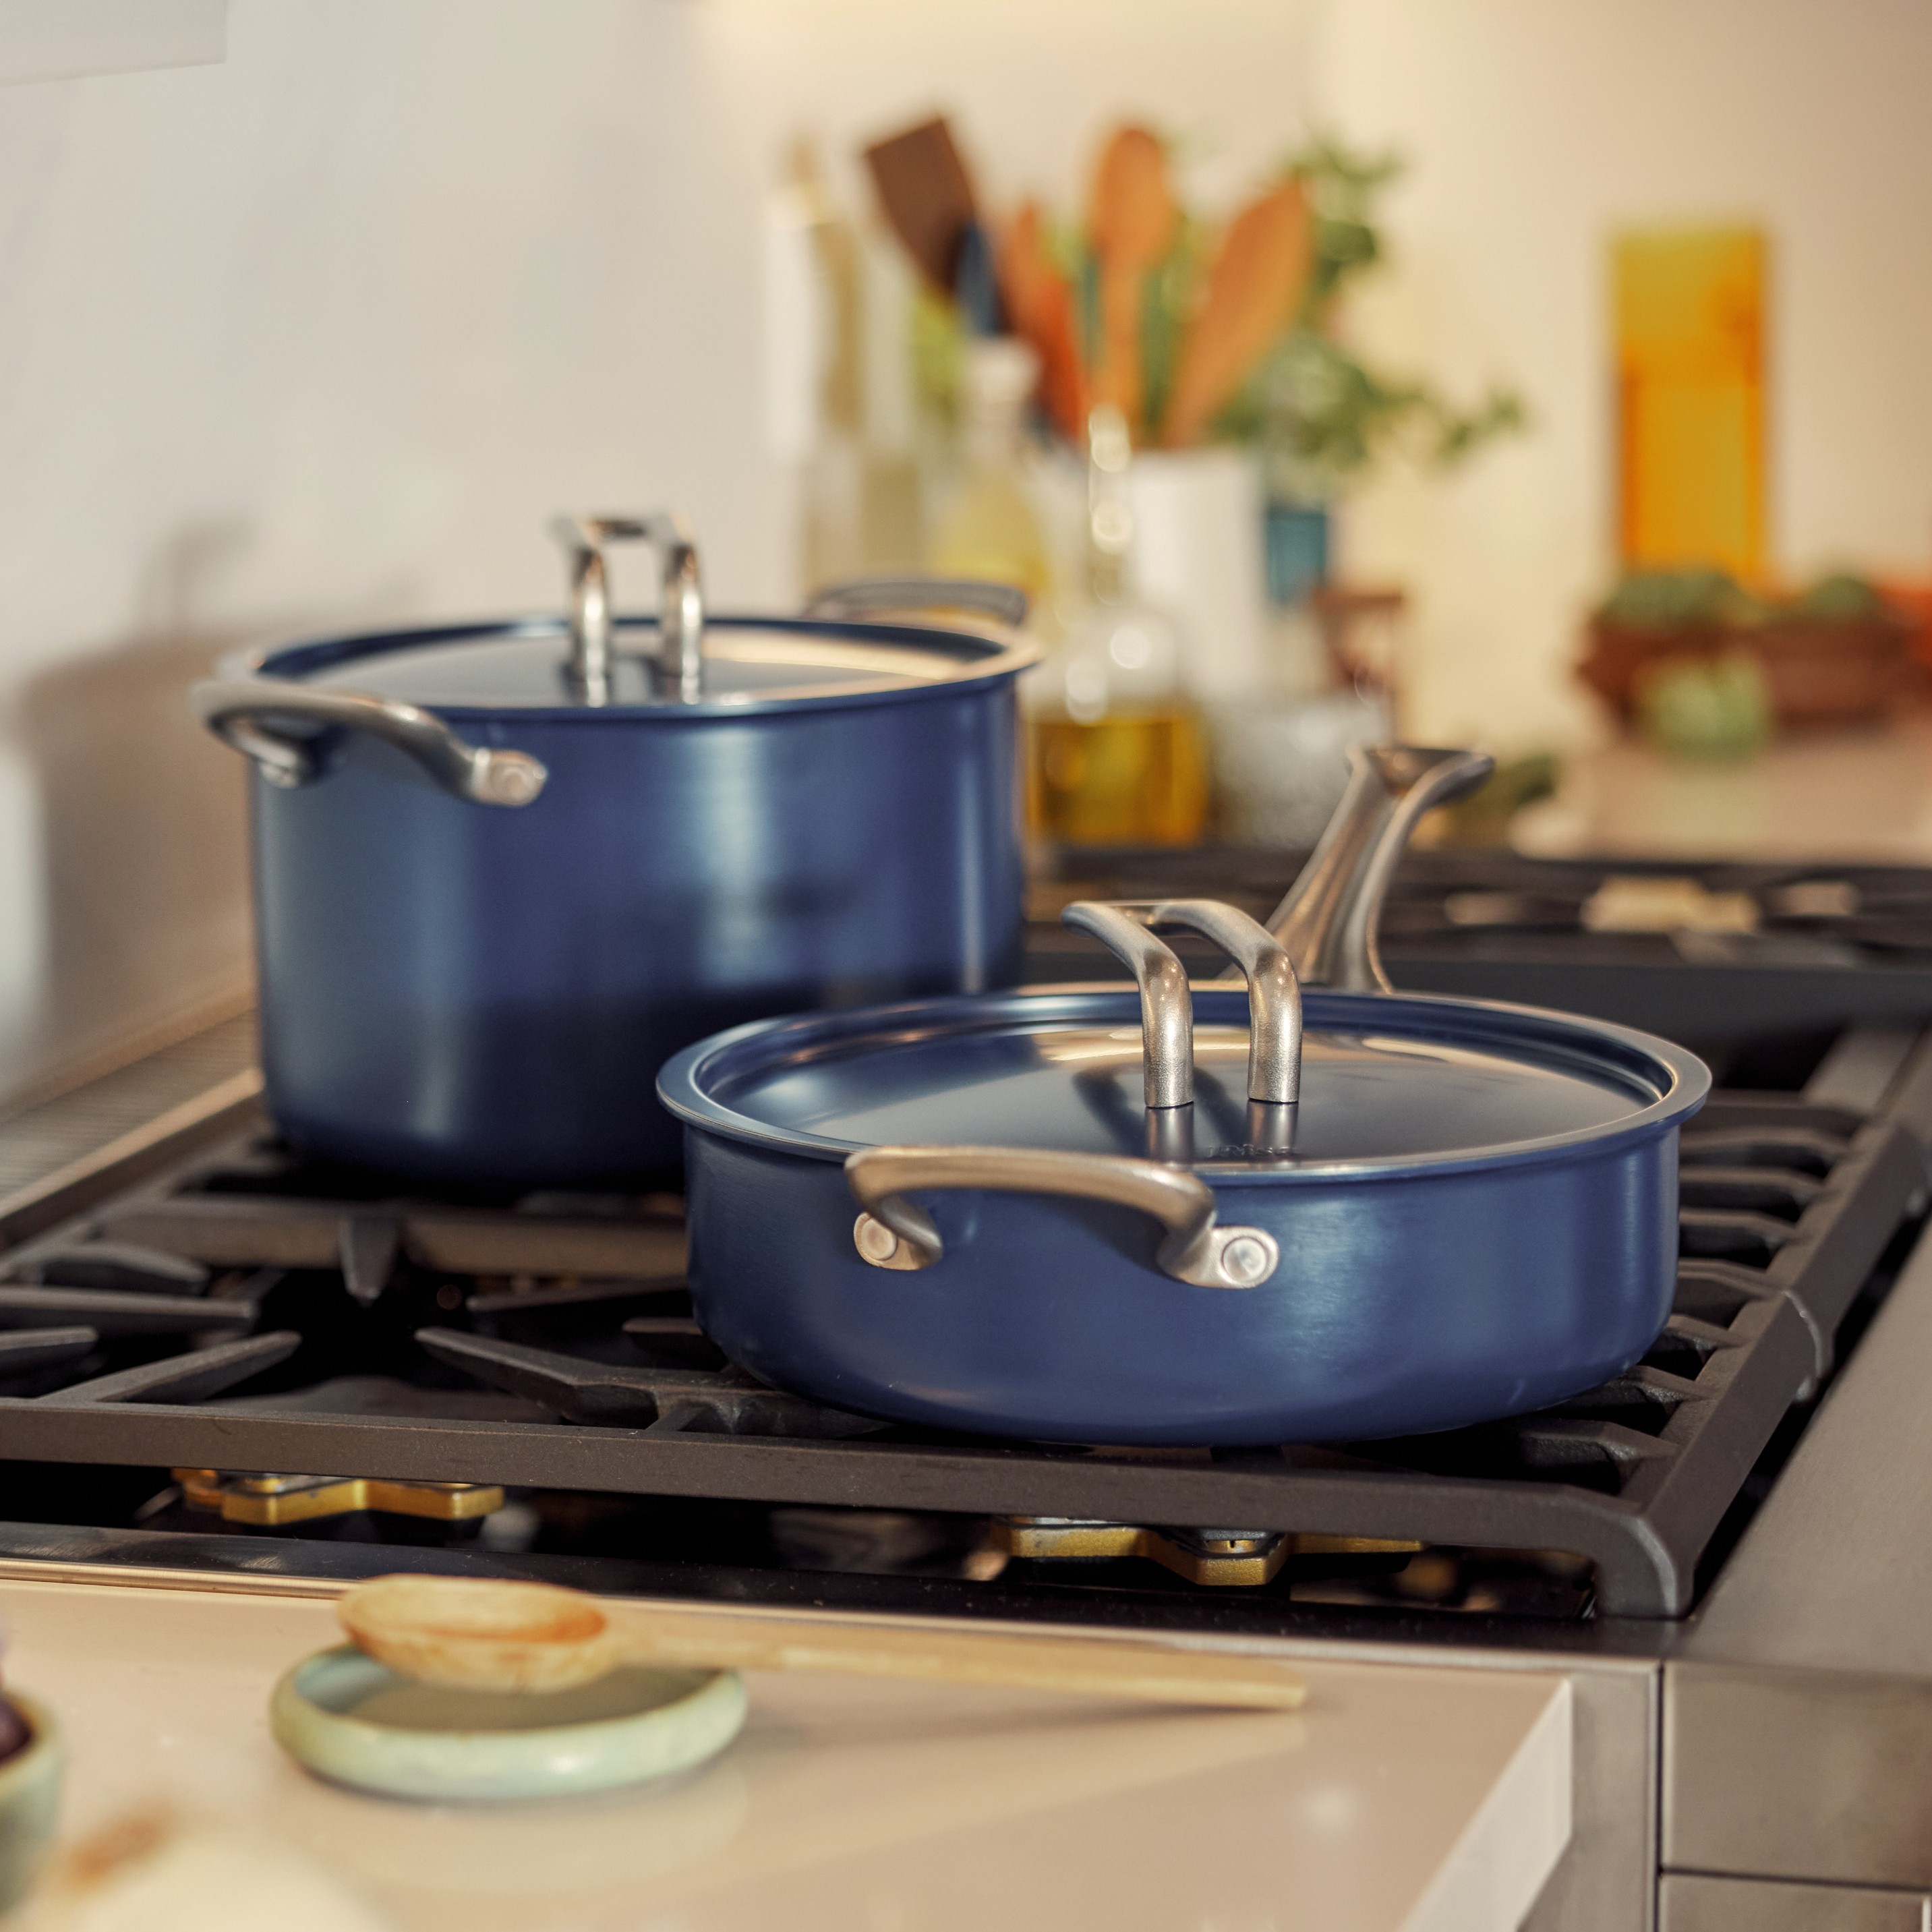 risacookware on X: Don't miss our biggest sale of the year 🎉 - save $90  on the Risa Cookware Set and up to 40% on products sitewide:   #BlackFriday #BlackFridayDeals #RisaCookware   /